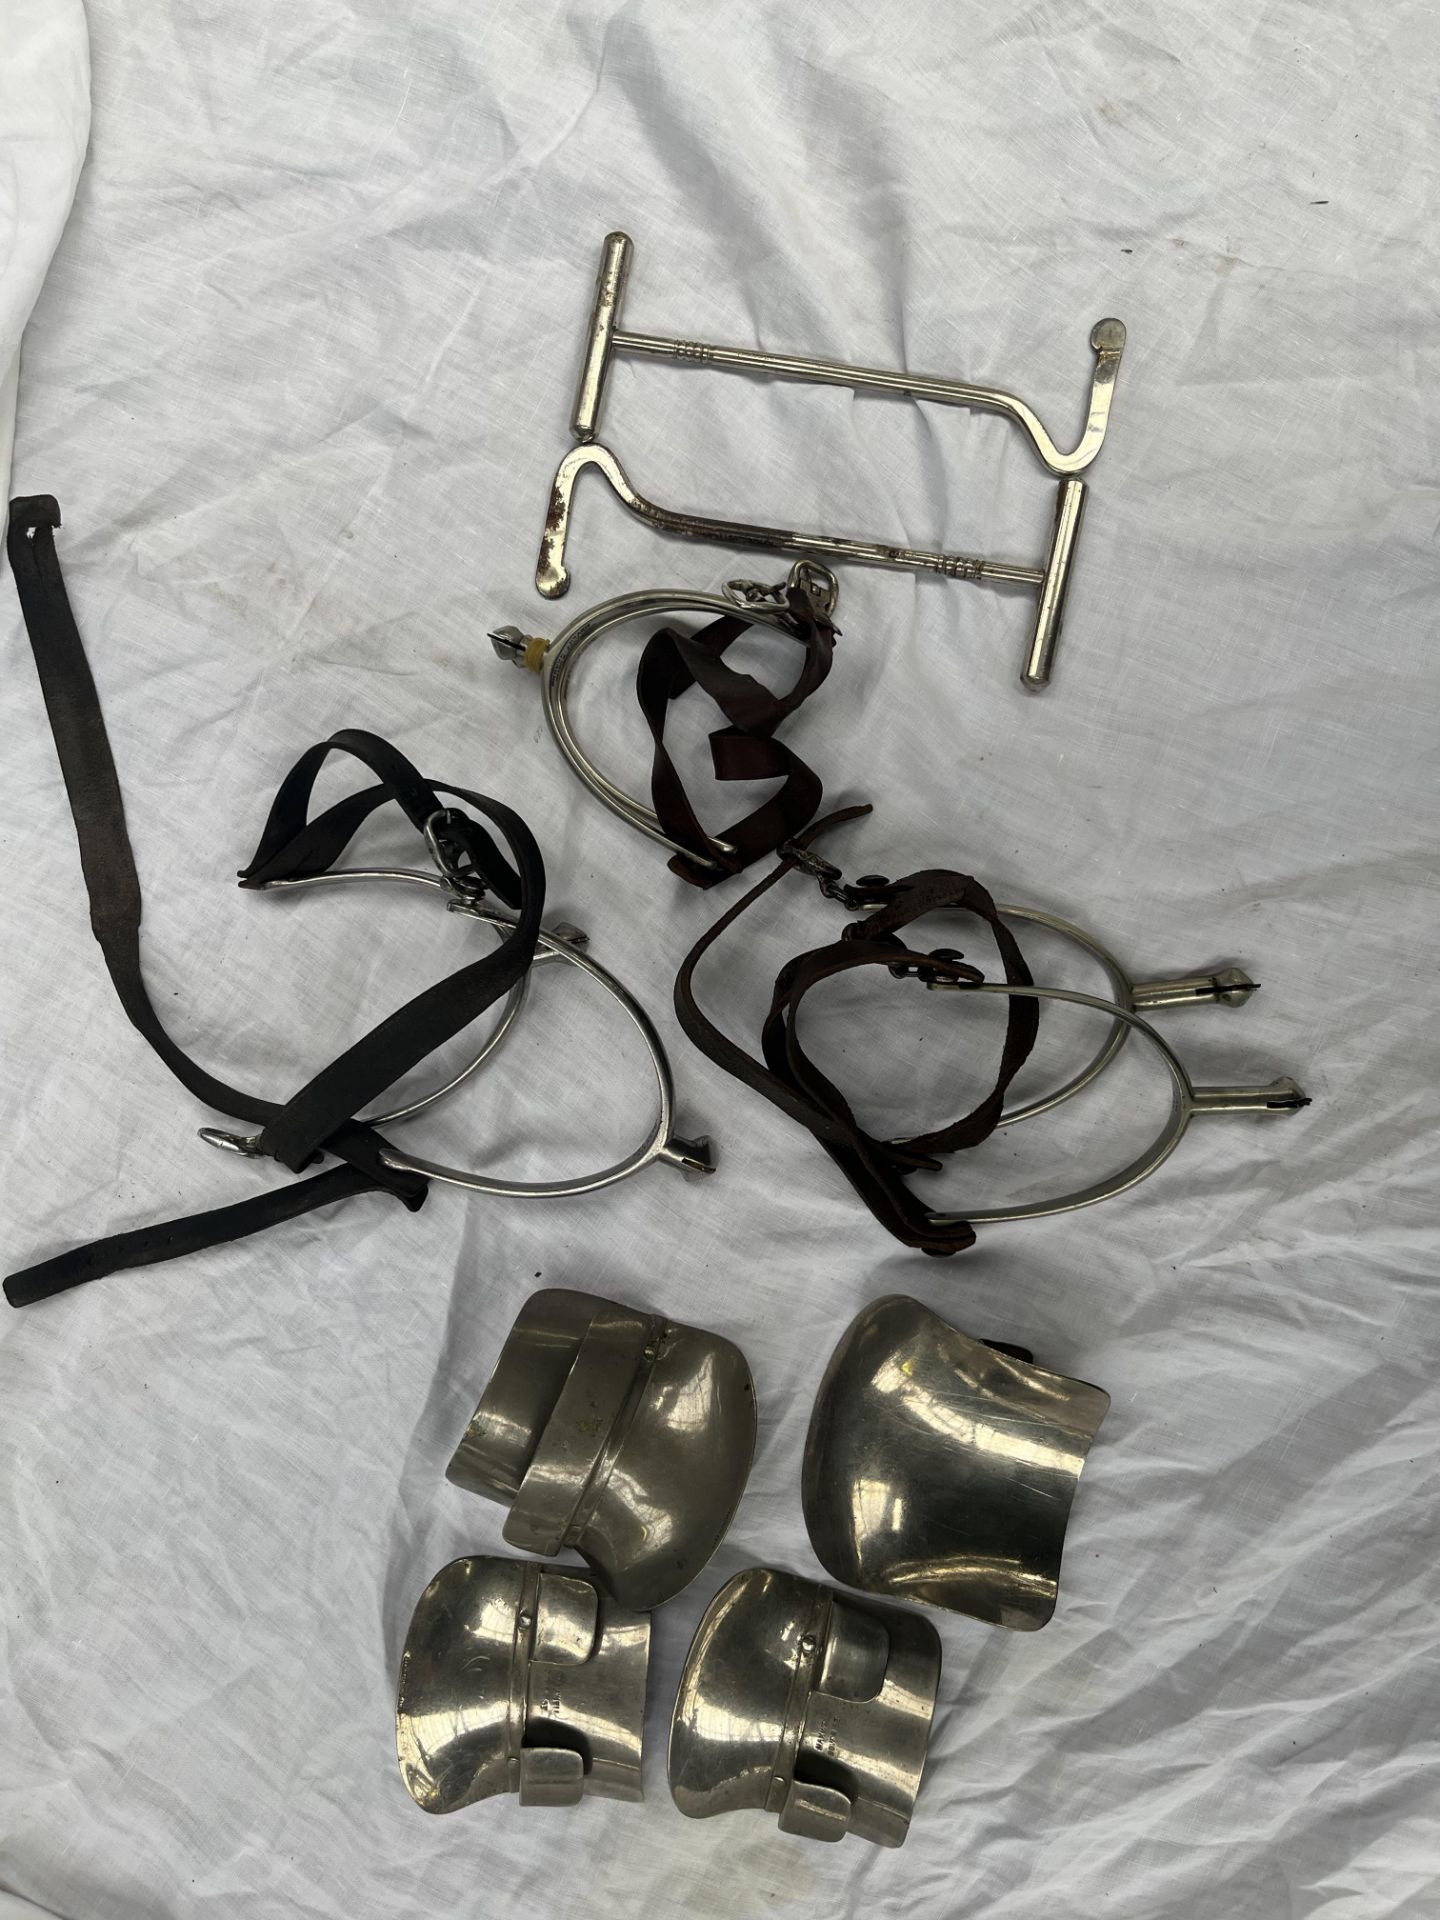 Three pairs of spurs, two sets of boot guides and a pair of boot pullers